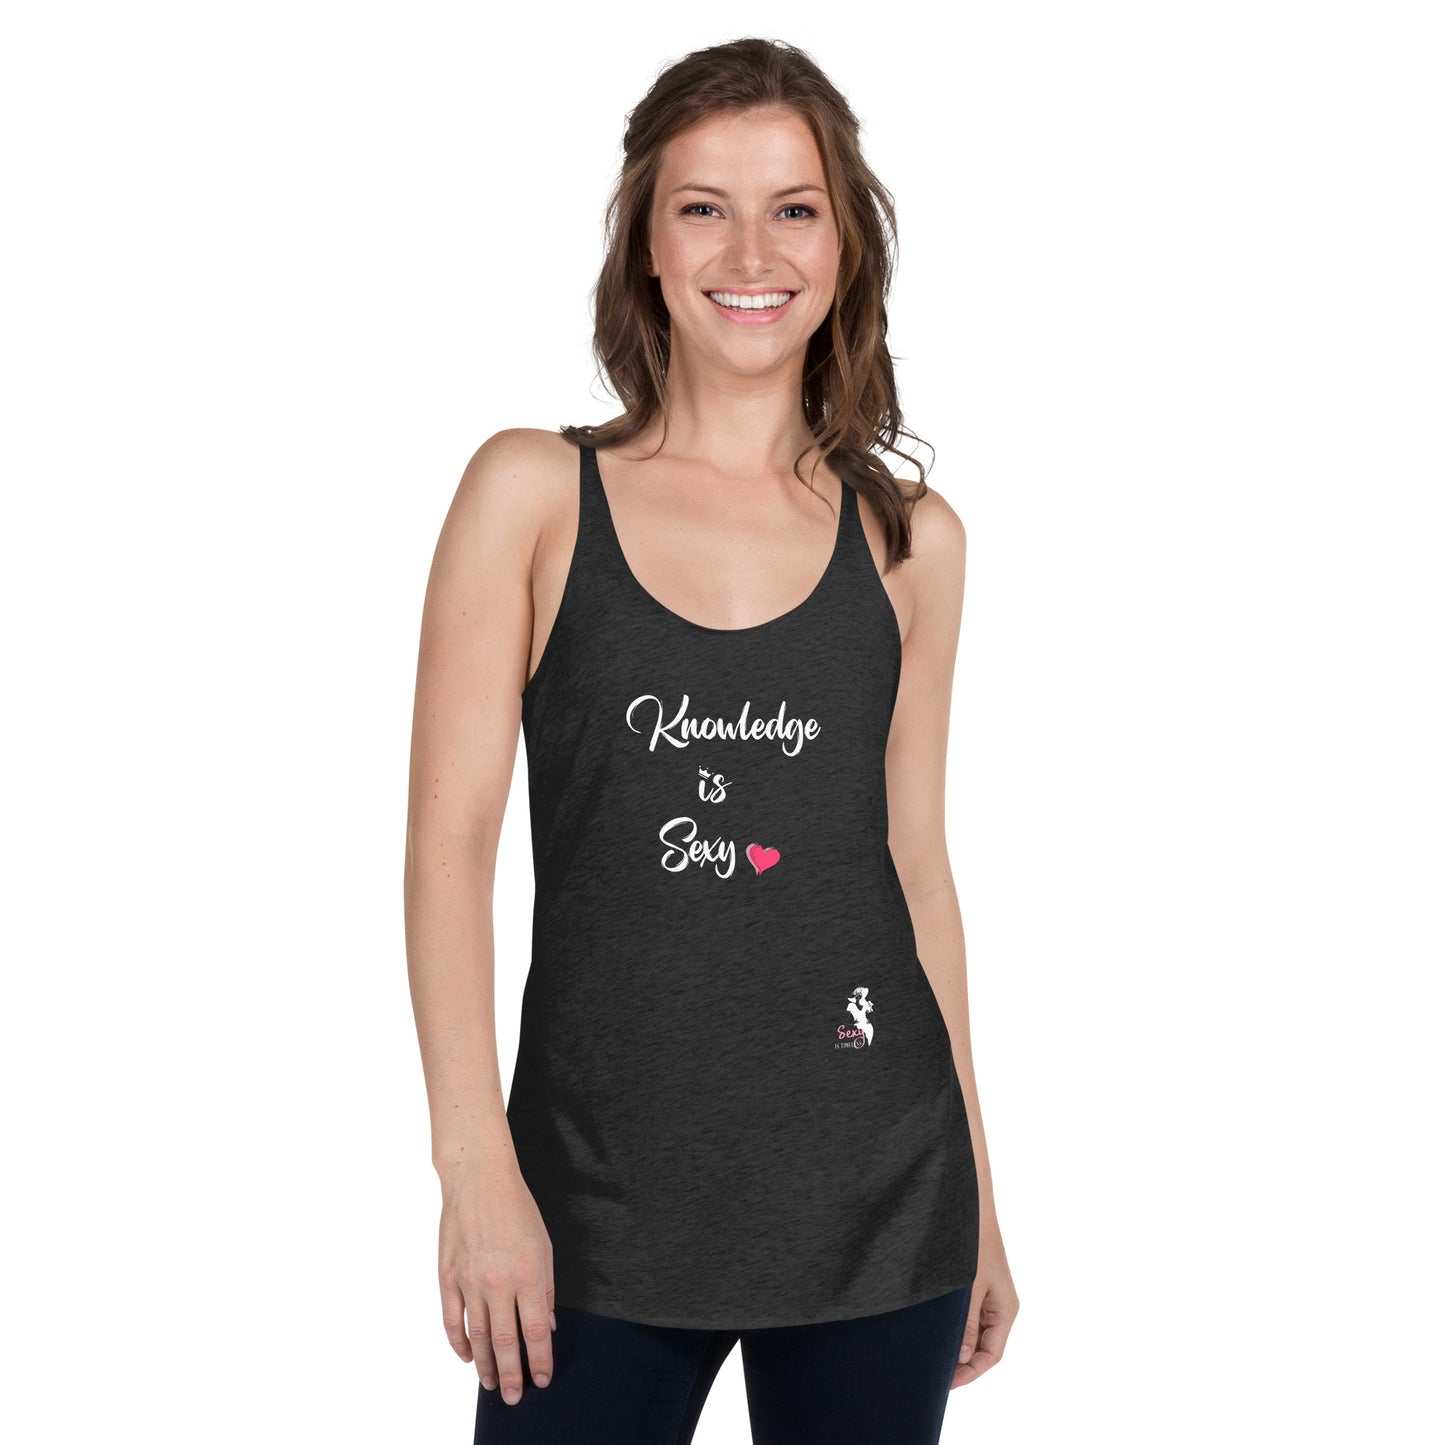 Women's Racerback Tank - Knowledge is Sexy - Colors